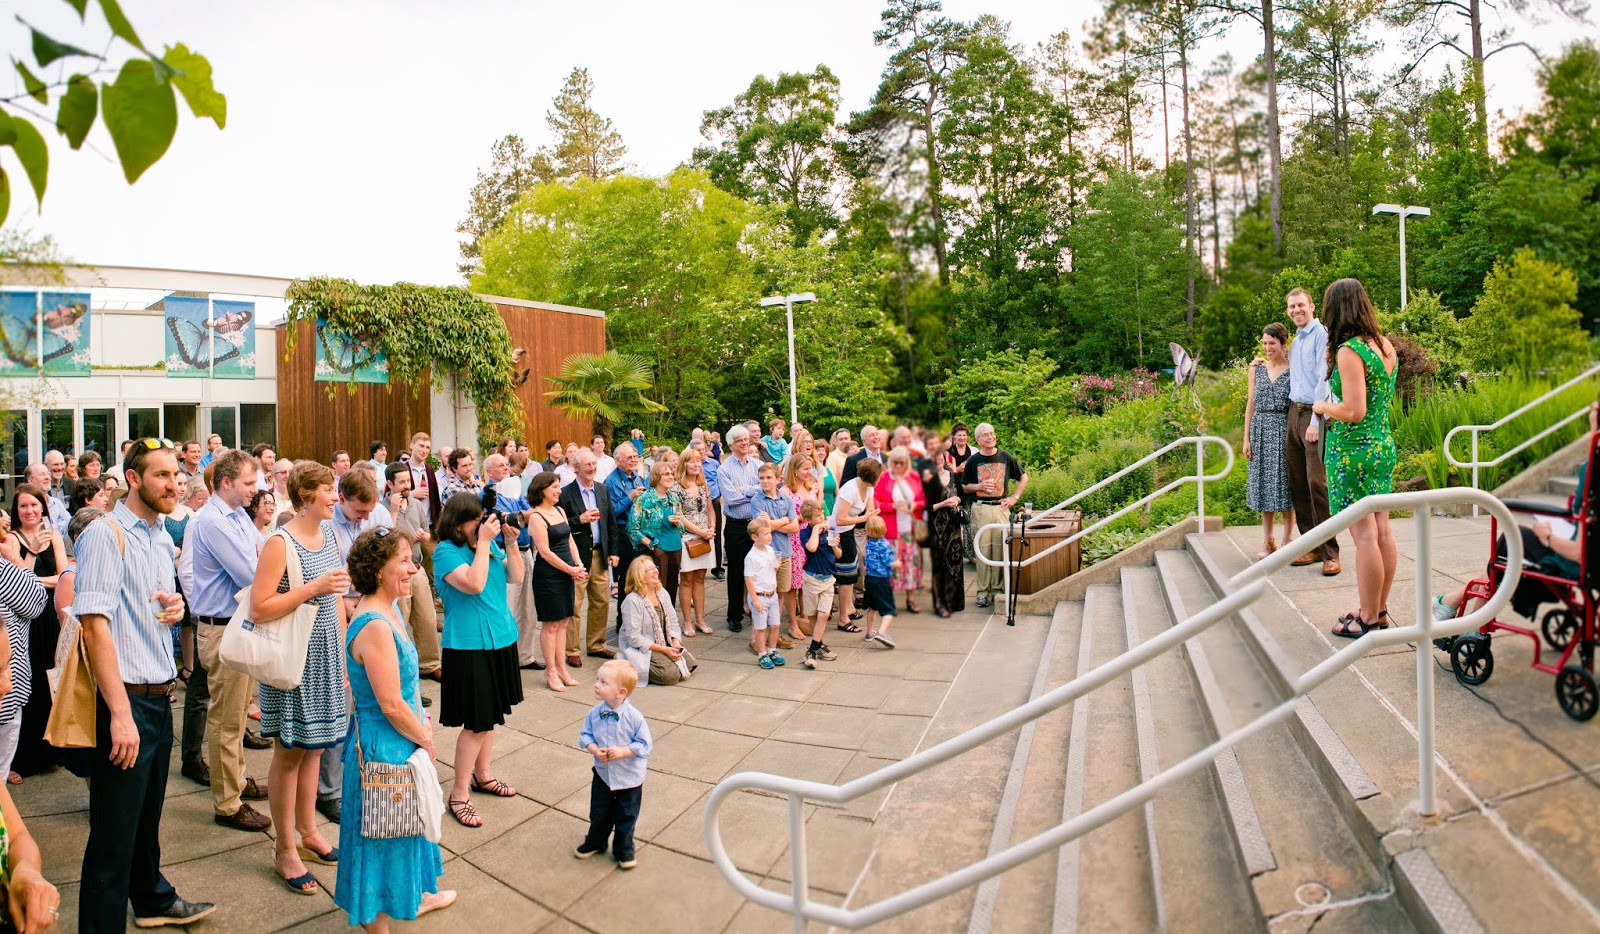 museum of life and science, museum wedding, contemporary wedding, greenhouse wedding, butterfly house, wedding photographers, wedding photography, wedding reception, train ride